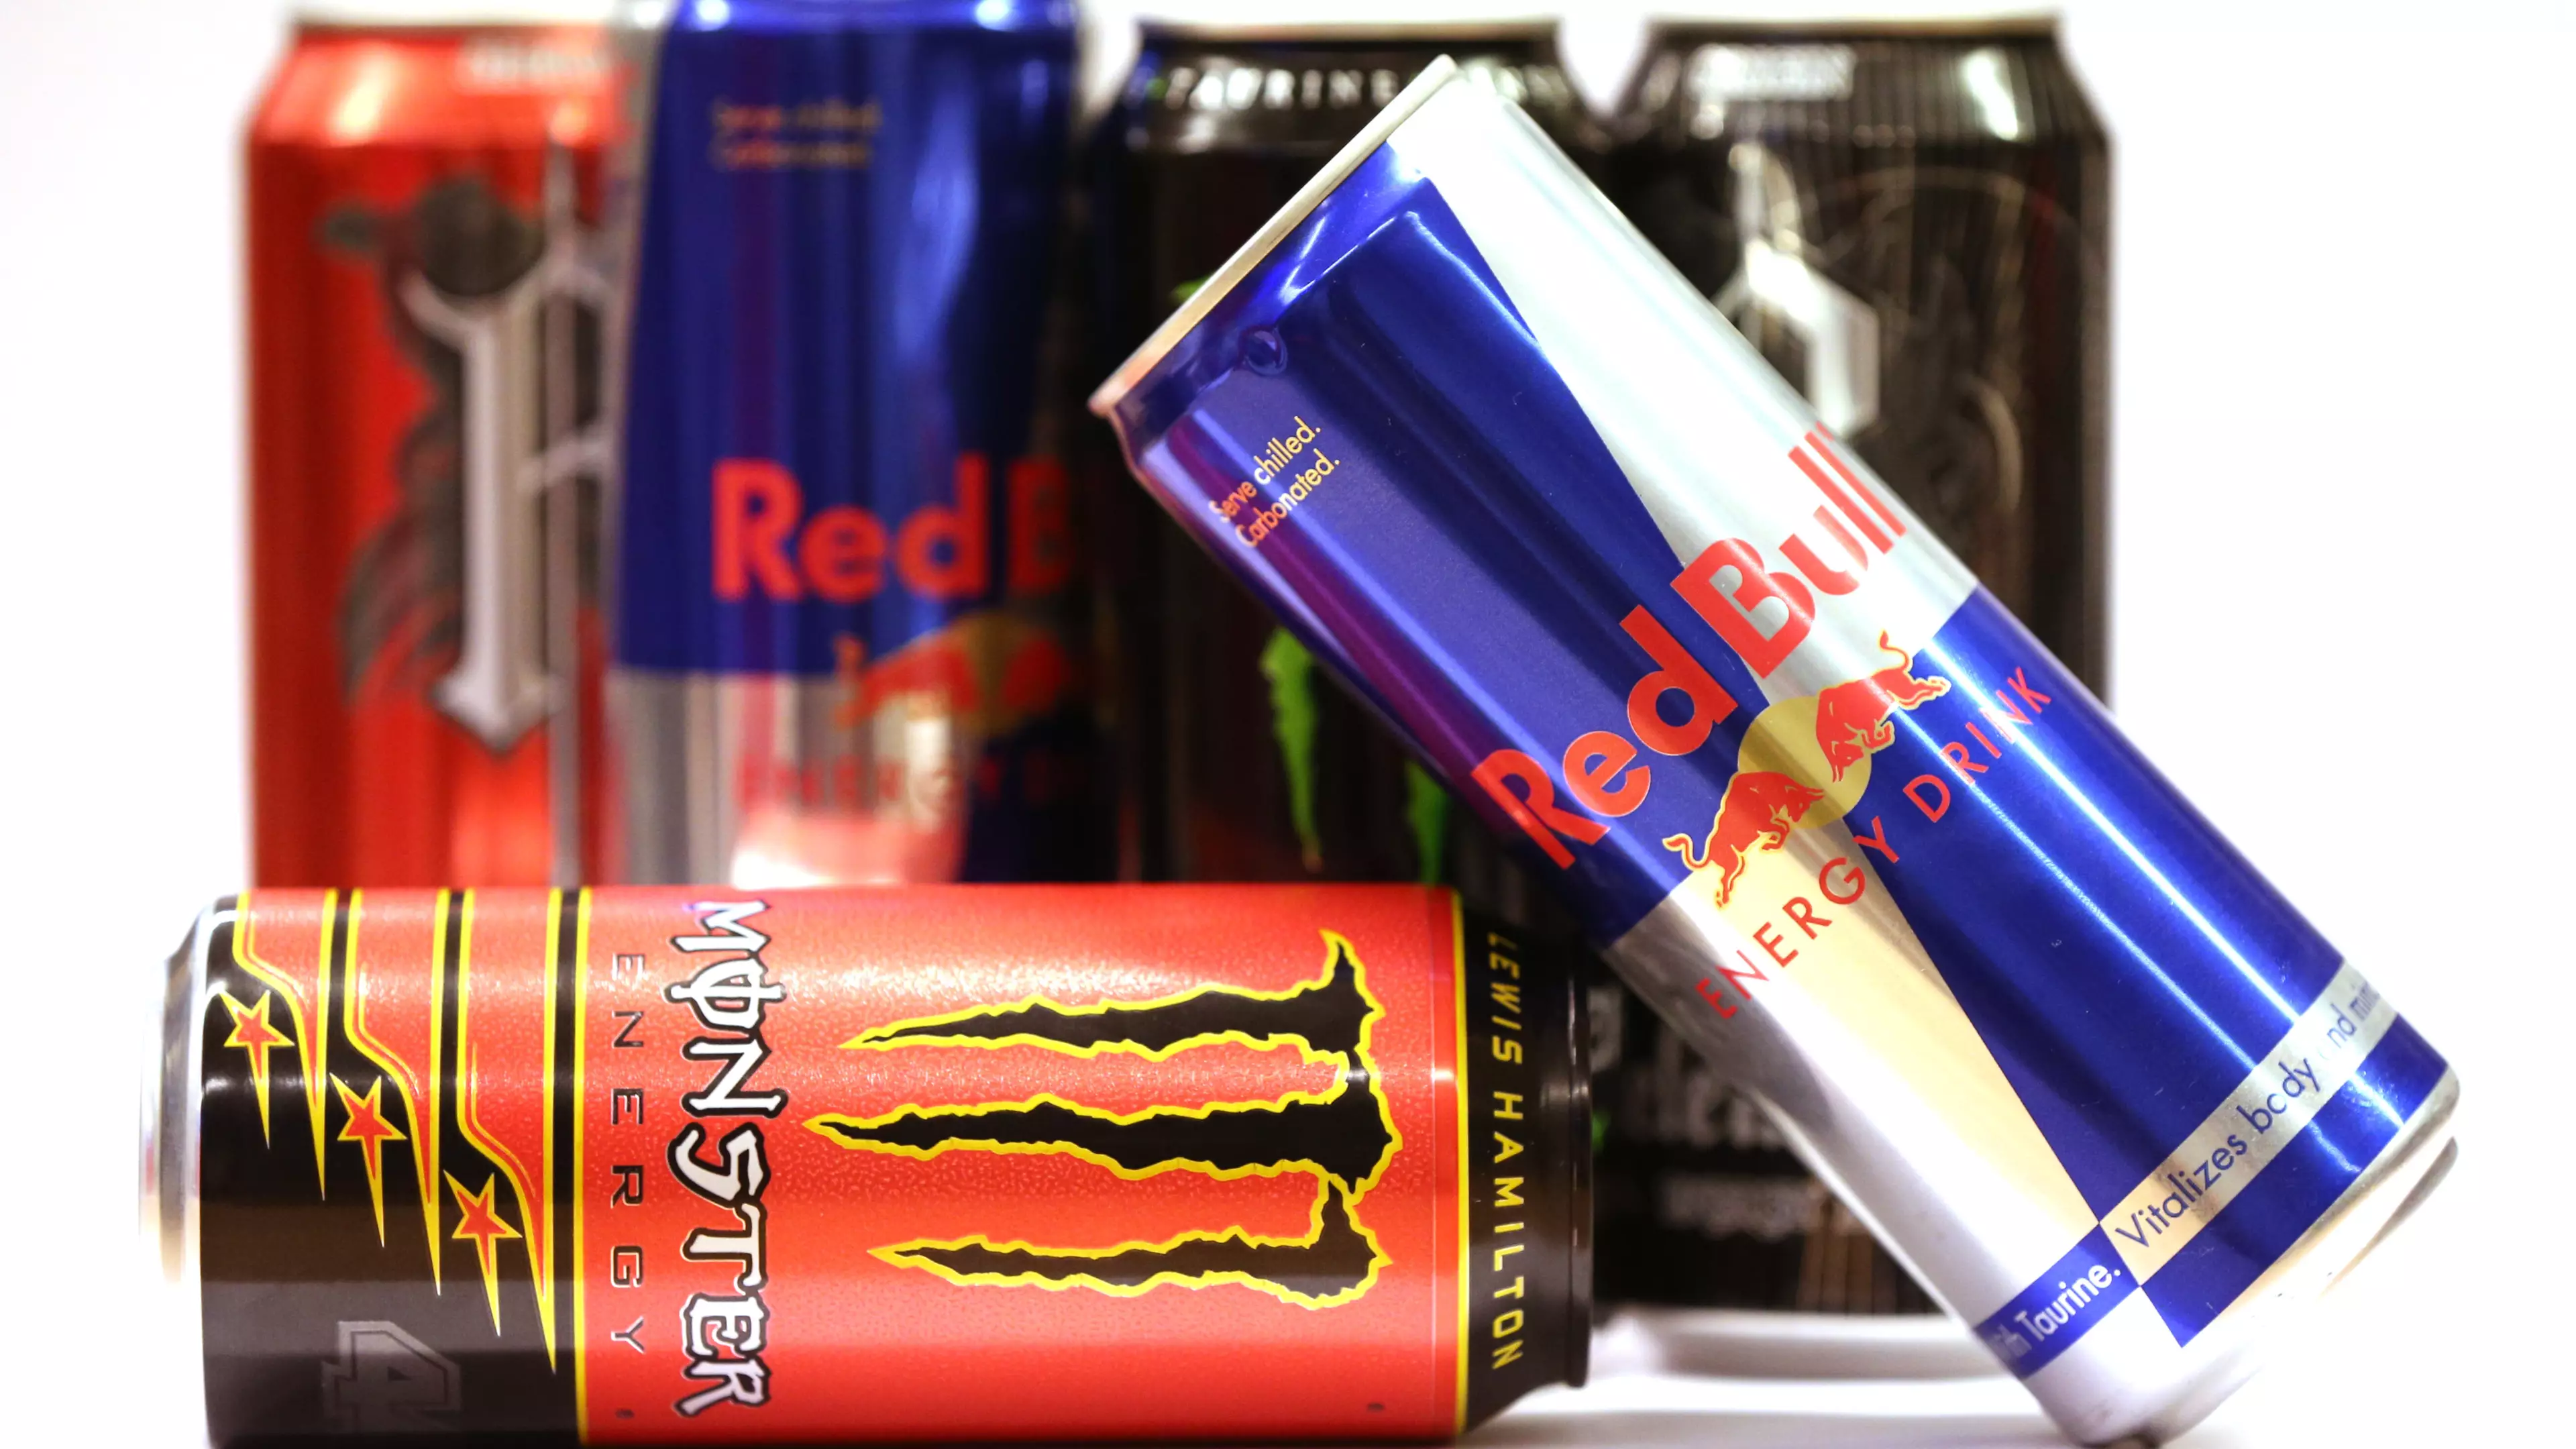 ​Just One Energy Drink Can Increase Risk Of Heart Attacks Or Strokes, According To Study